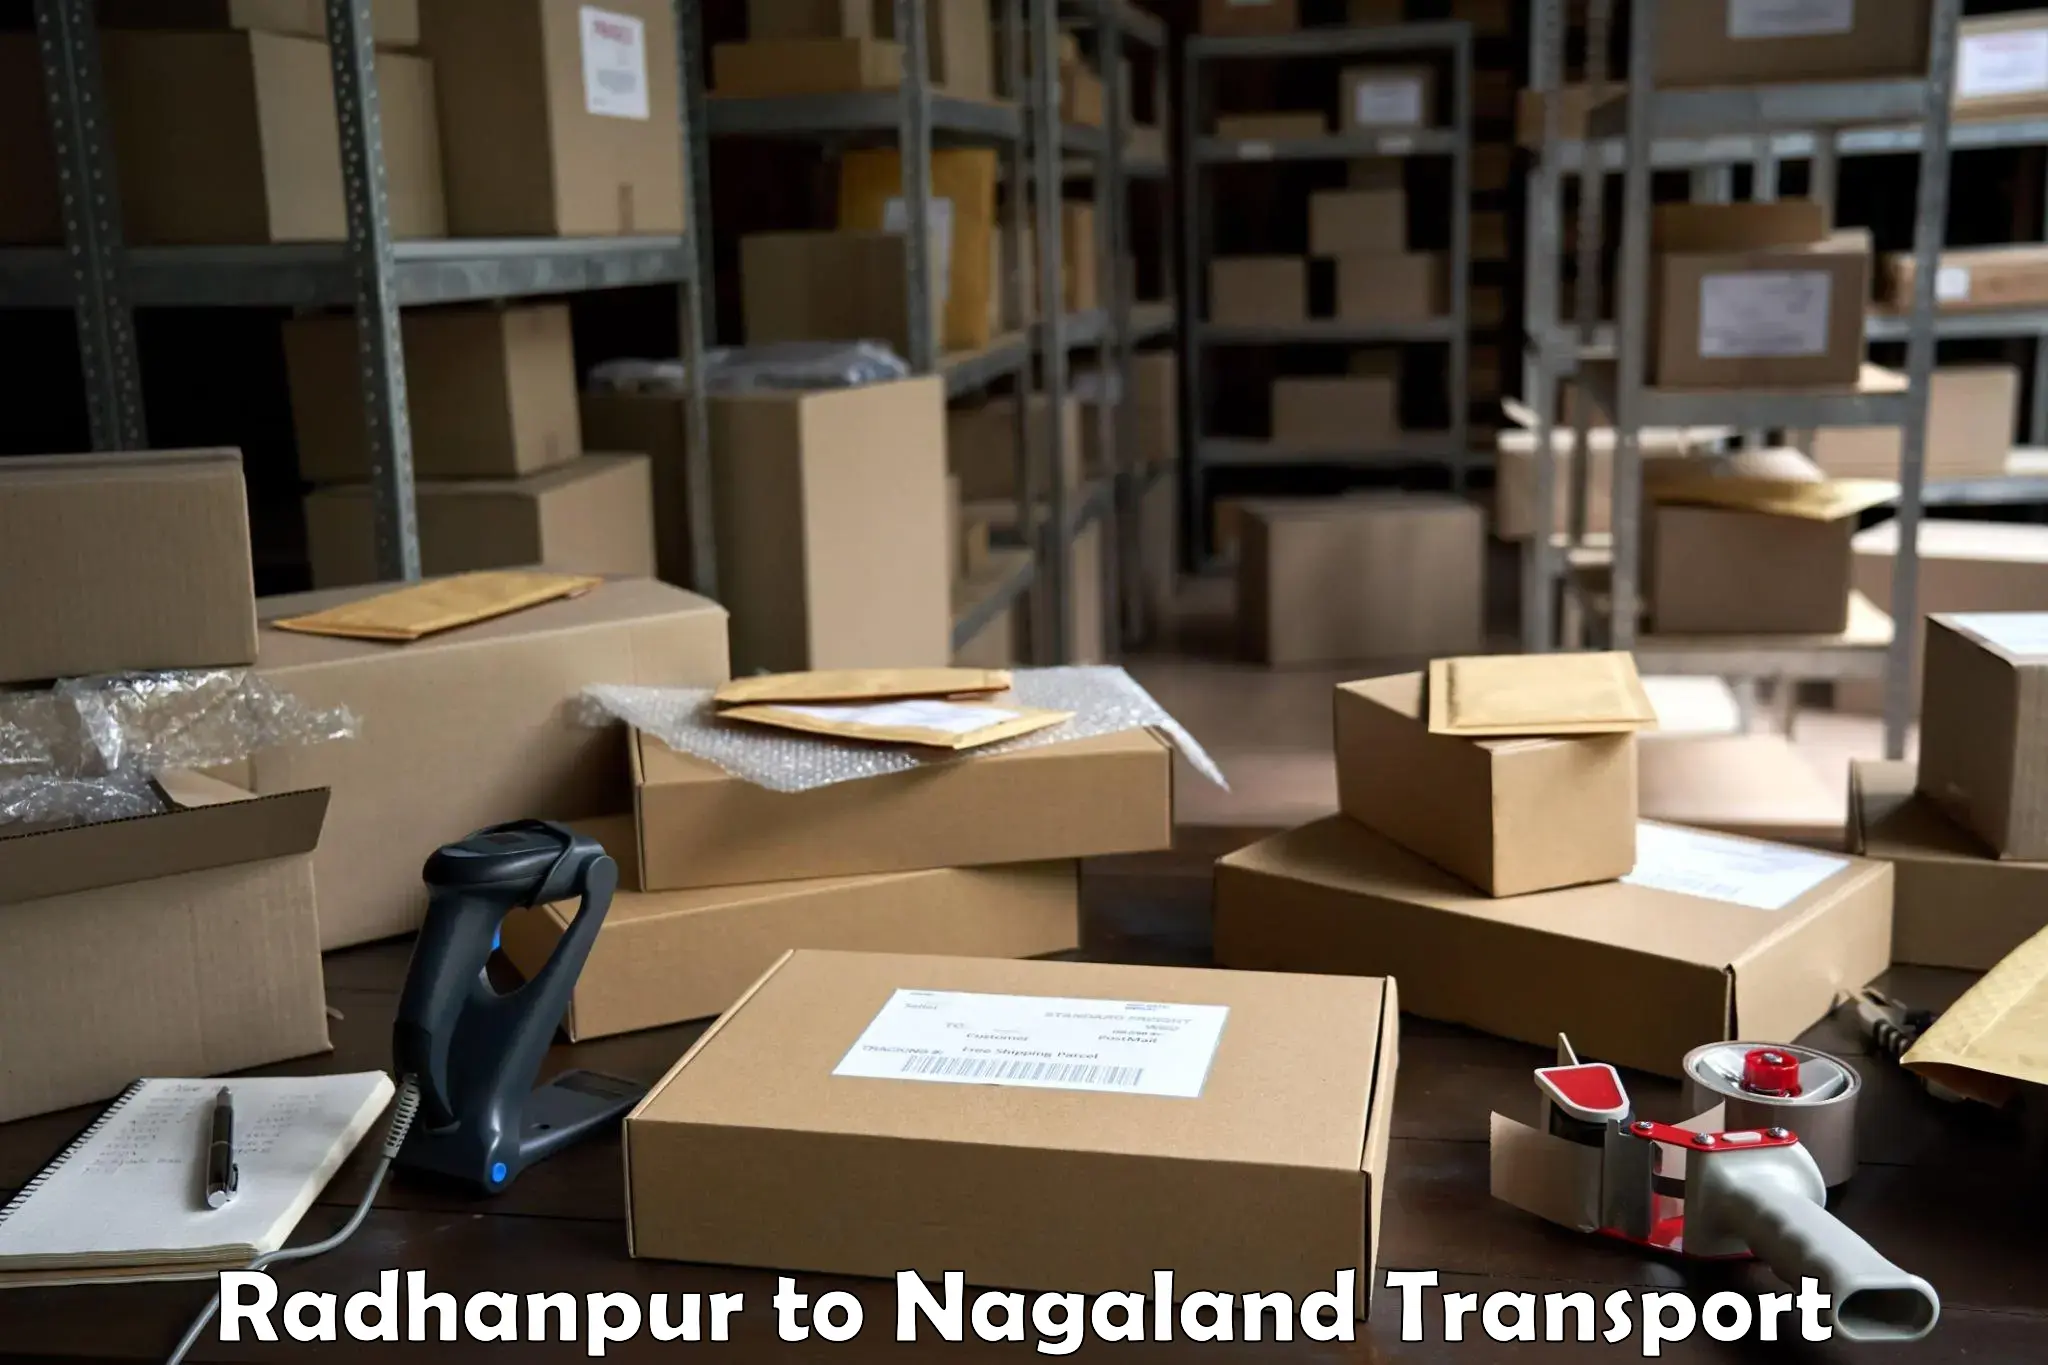 Daily parcel service transport Radhanpur to Nagaland